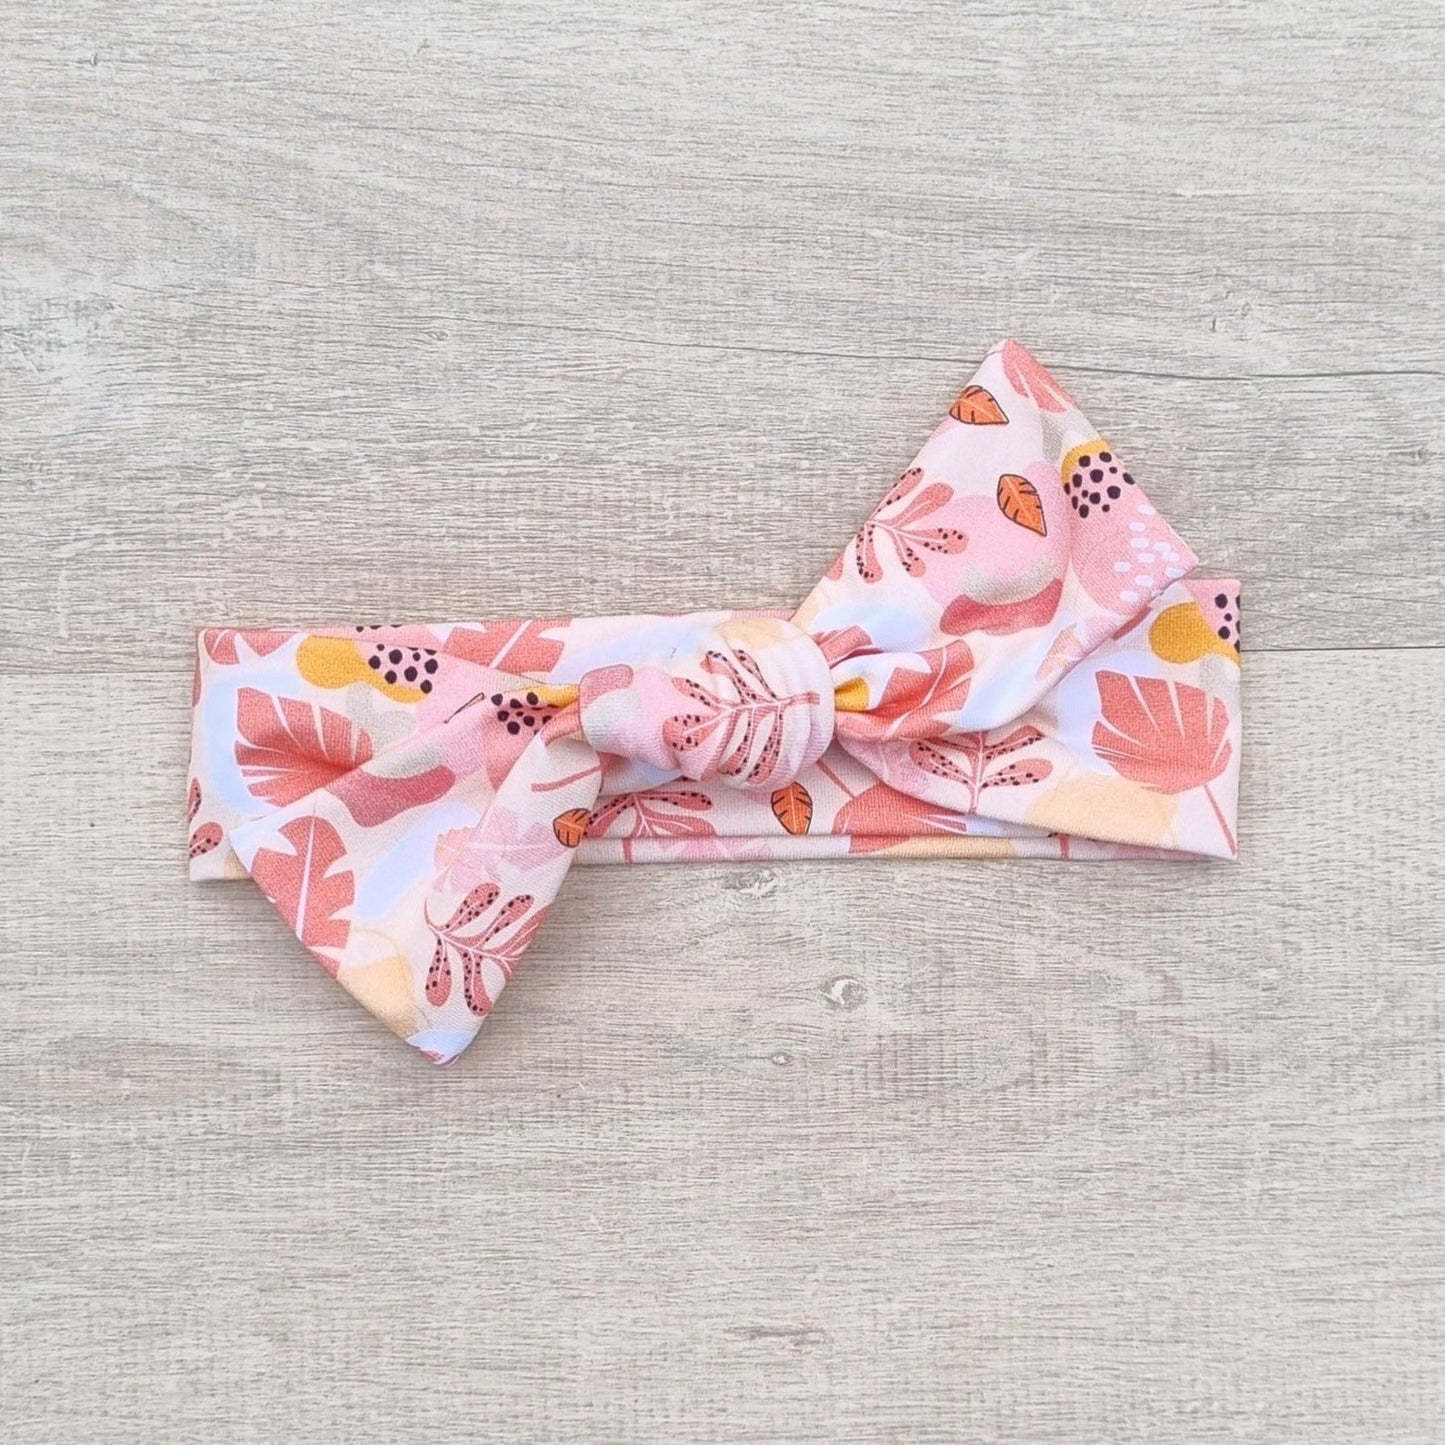 Top Knot Headband - Sara against wooden backdrop. Pink and orange leaves on white background.